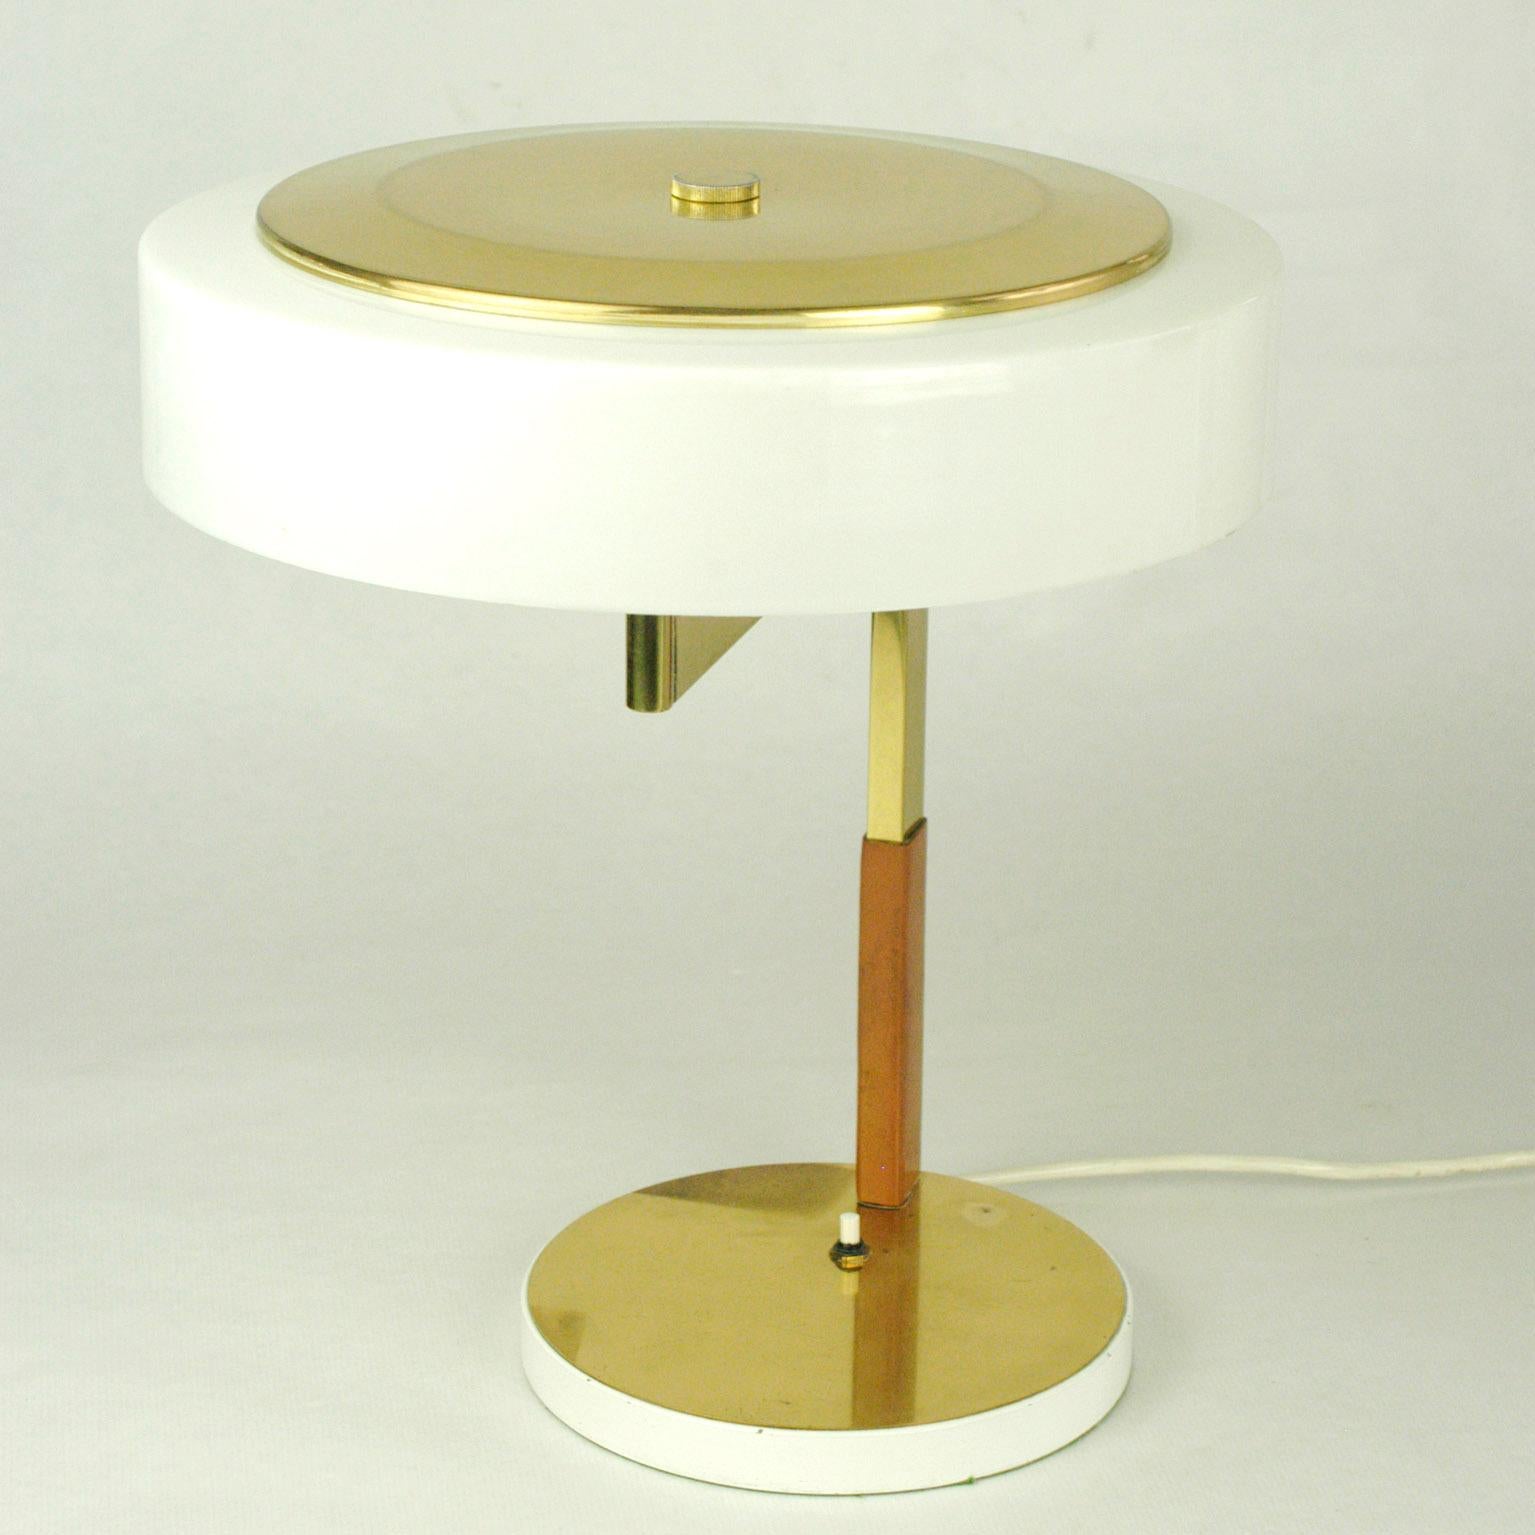 Austrian Midcentury Brass Leather and White Acrylic Desk Lamp by J.T. Kalmar For Sale 1